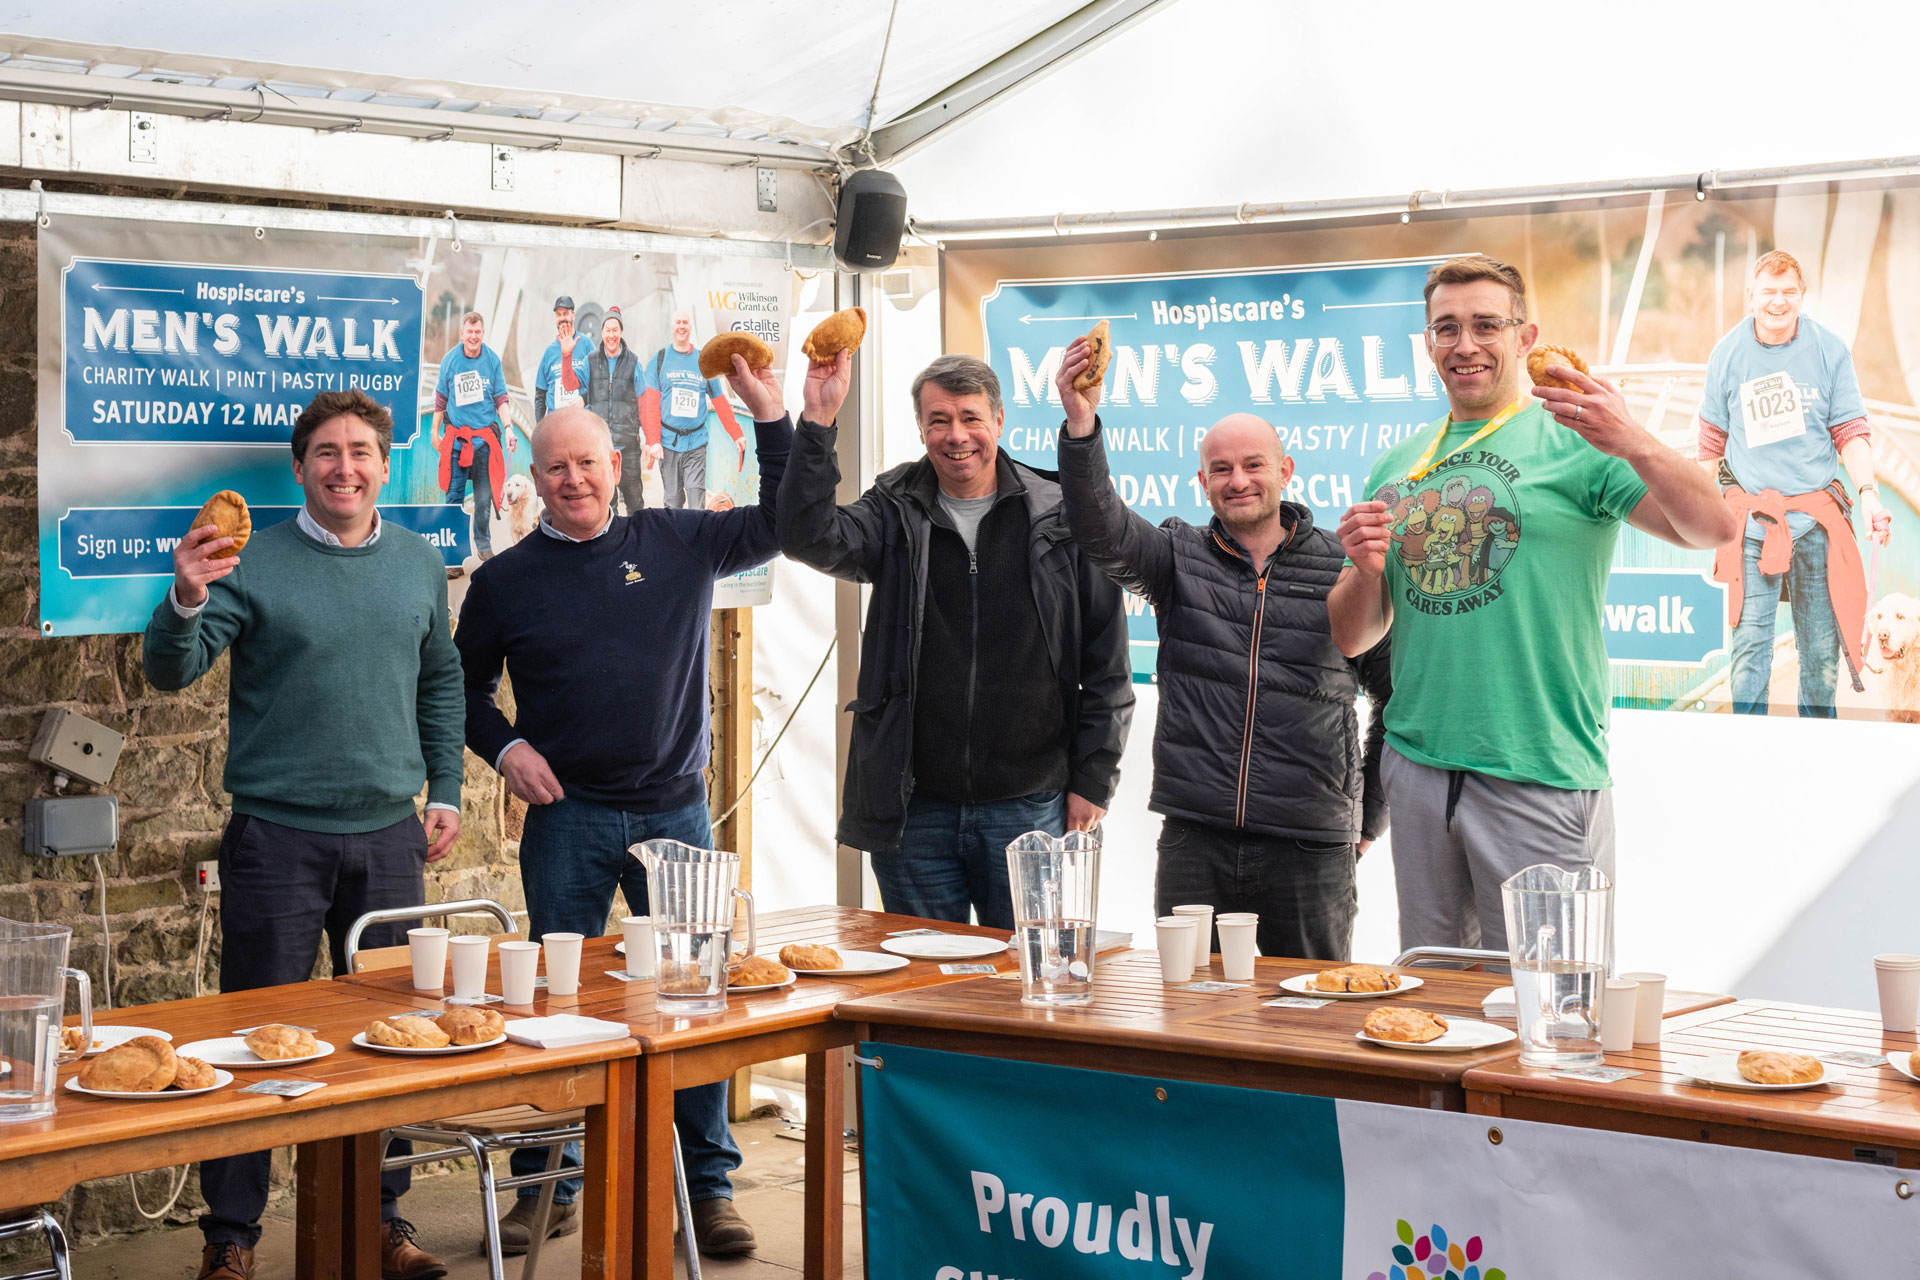 Local businesses sink their teeth into competition with Men’s Walk launch stunt